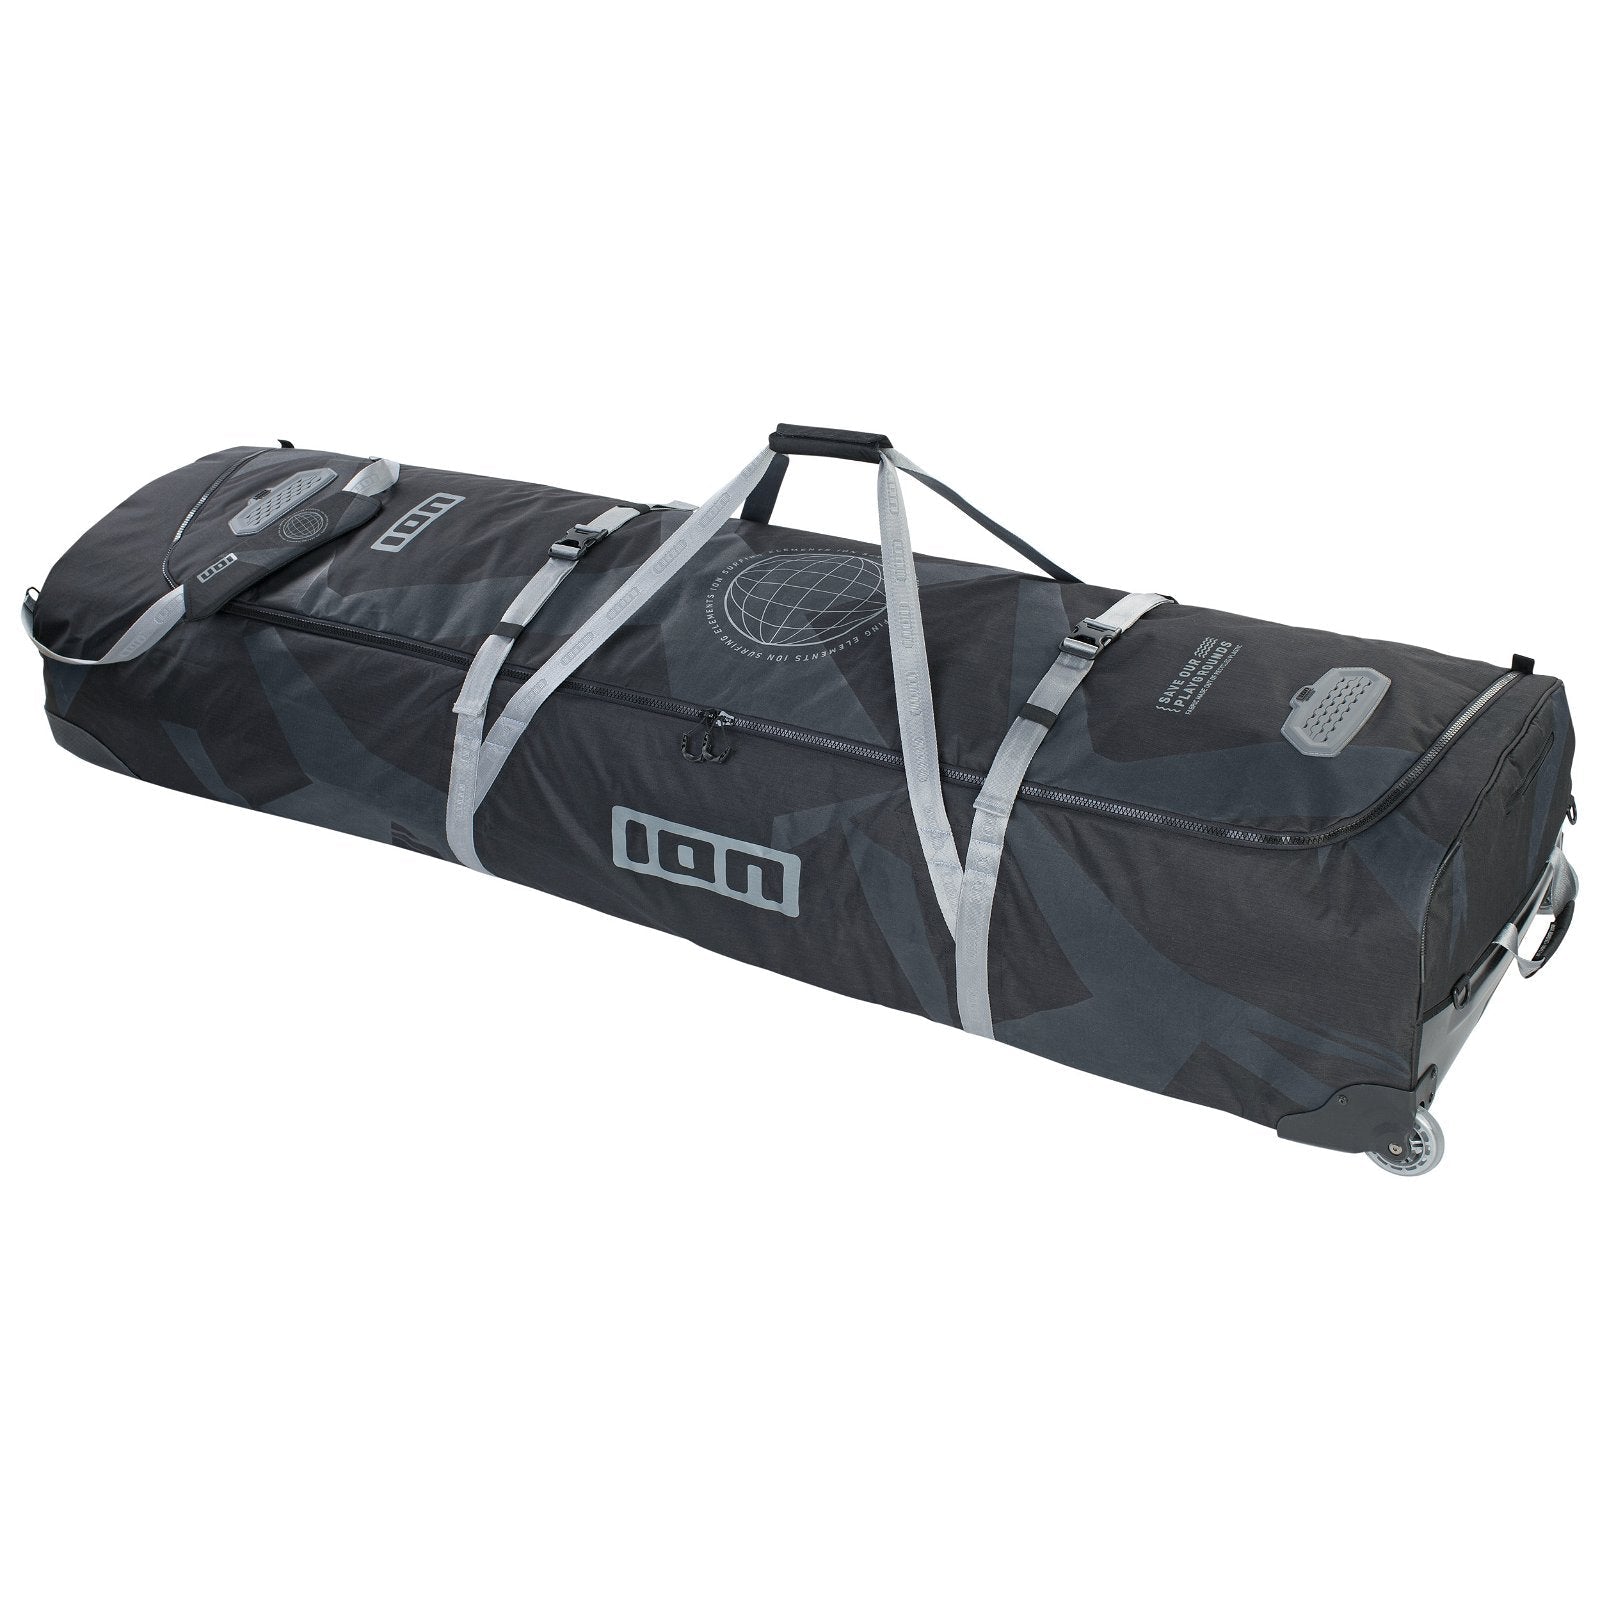 ION Gearbag Tec 2023-ION Water-6.0-48220-7025-9010583187839-Surf-store.com